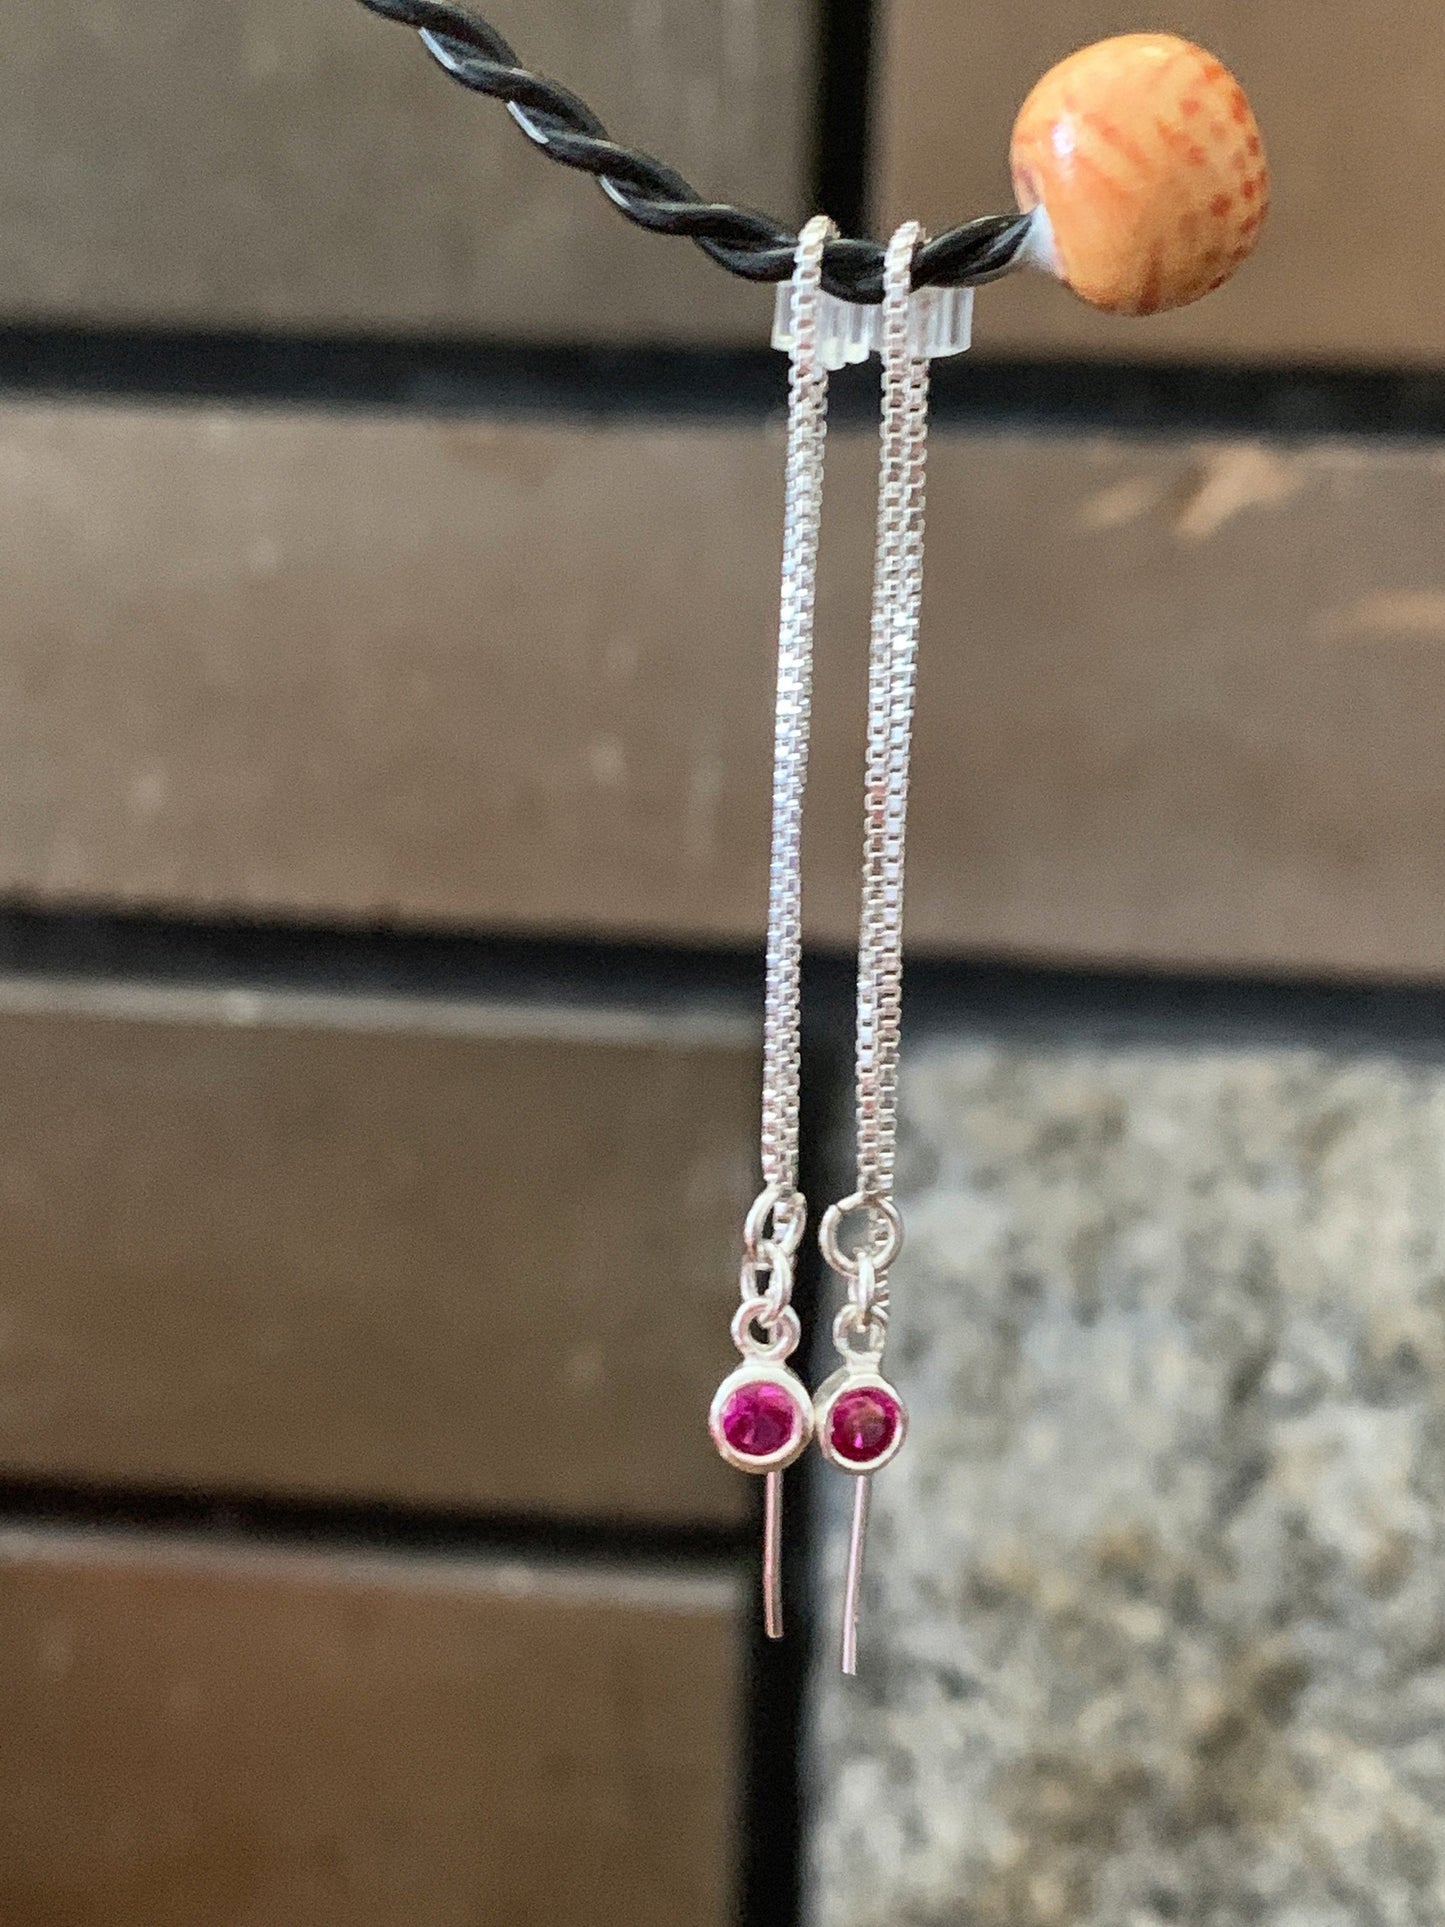 Sterling Silver Ear Threads with Small Ruby cz Drops  Minimalist Earrings